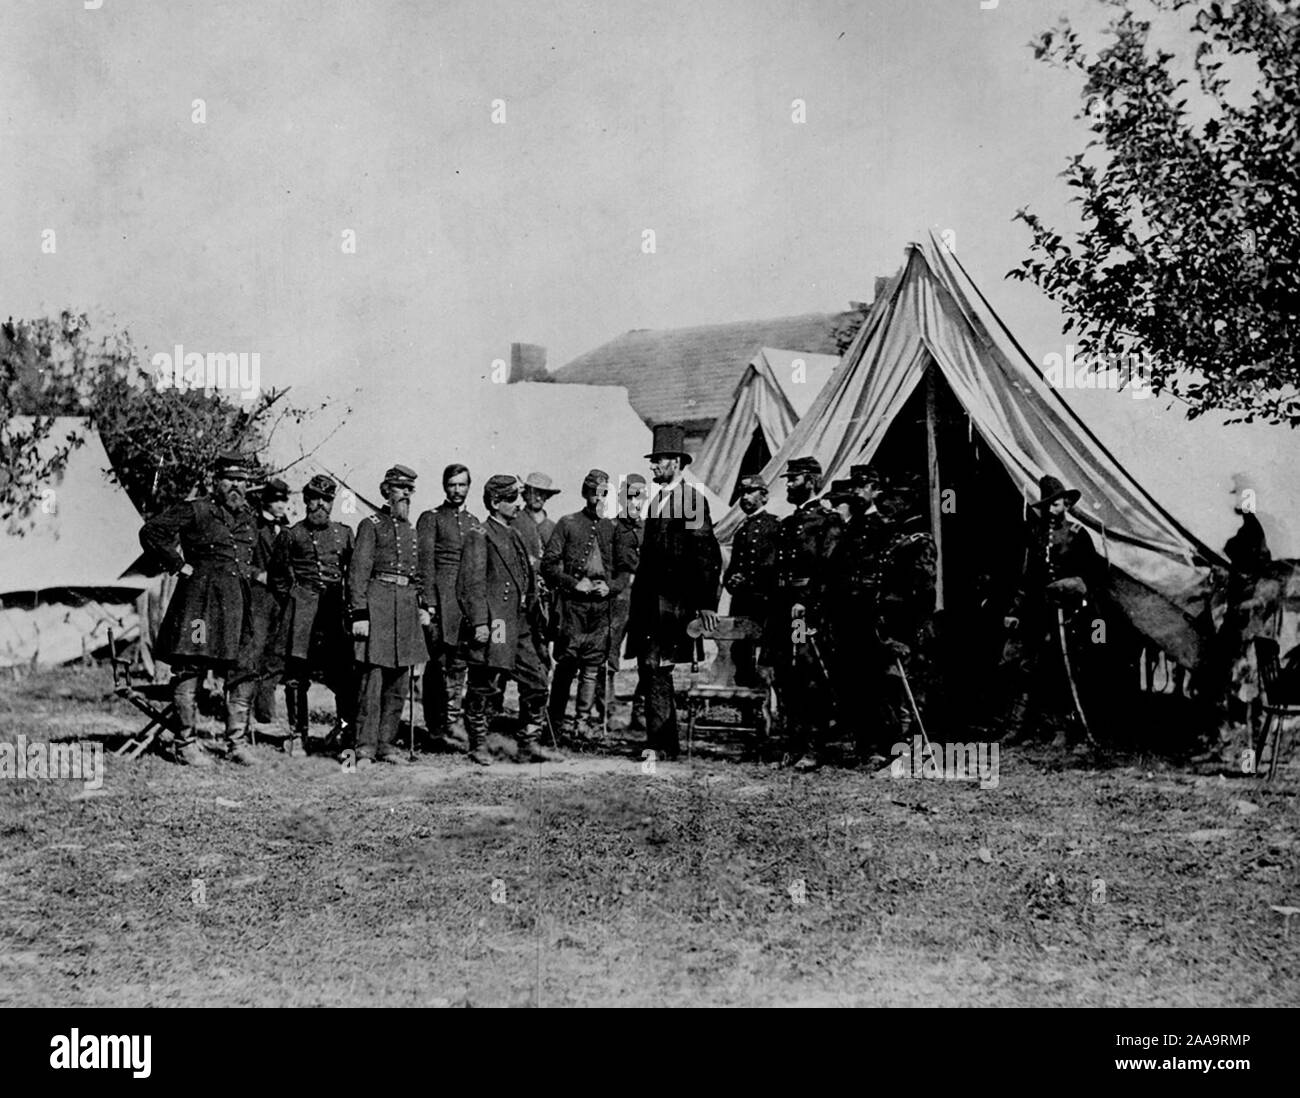 Civil War President Lincoln visiting the battlefield at Antietam, Md., October 3, 1862. General McClellan and 15 members of his staff are in the group. Stock Photo